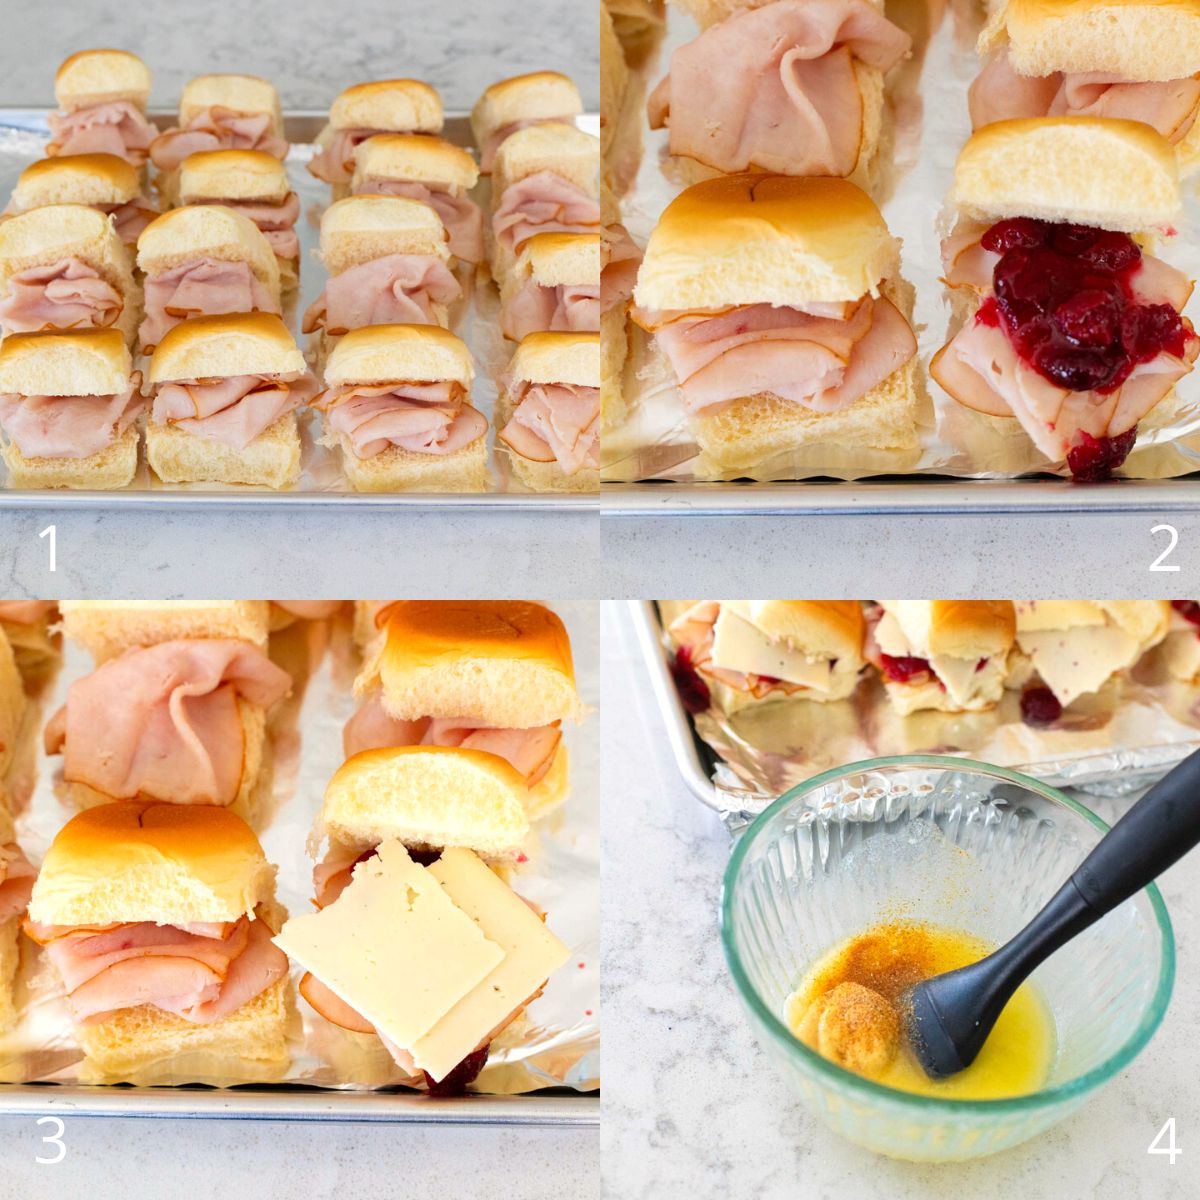 The step by step photos show how to layer the ingredients inside the slider bun.